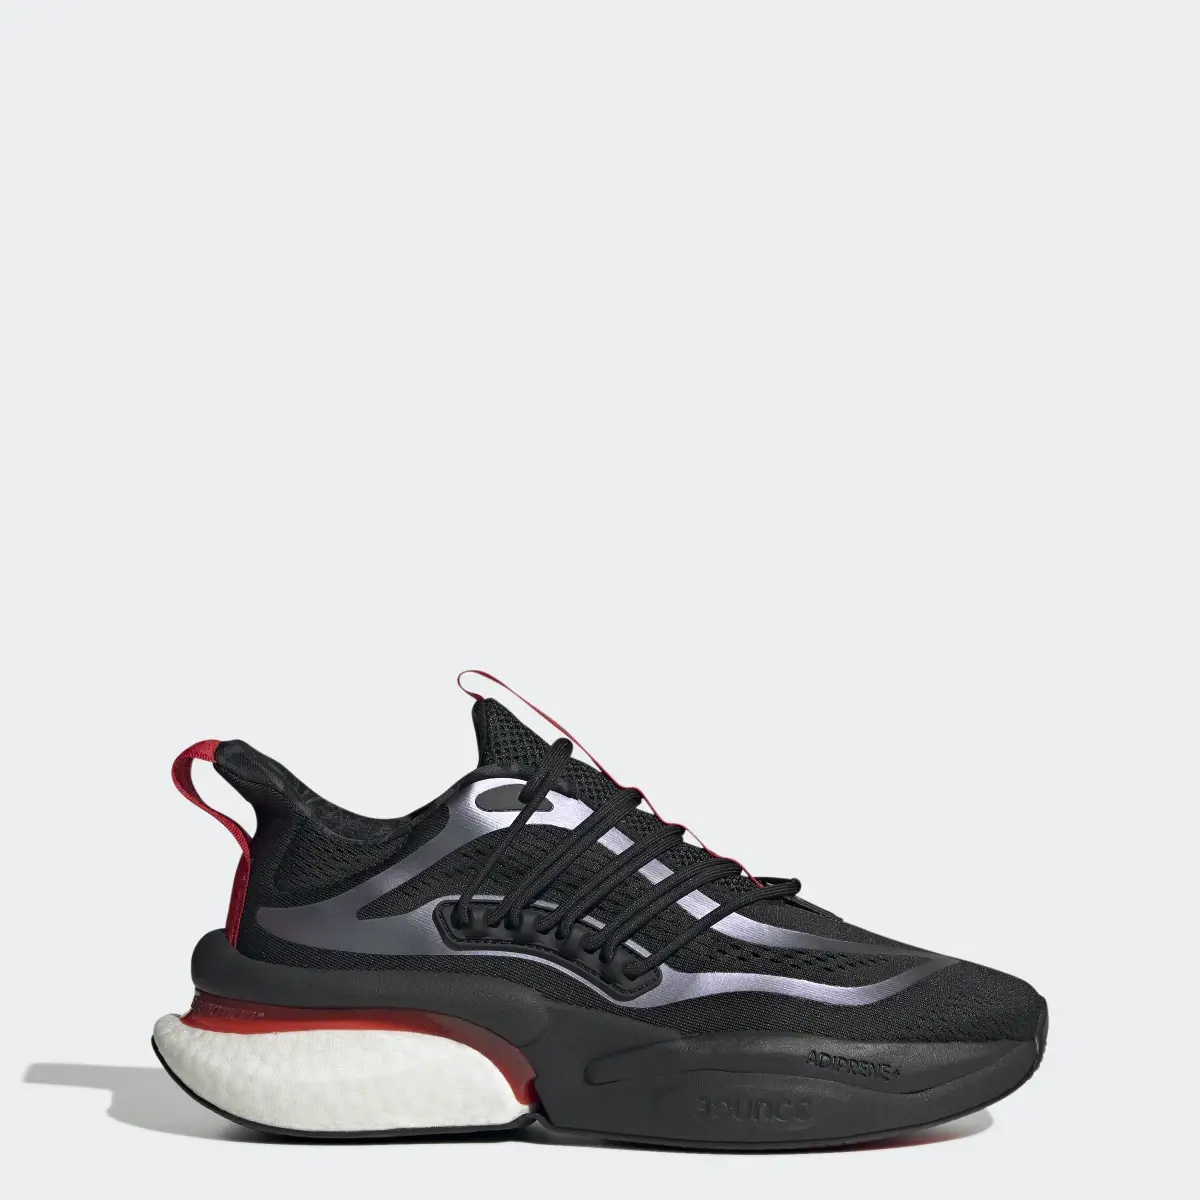 Adidas Planet Z Alphaboost V1 Shoes. 1